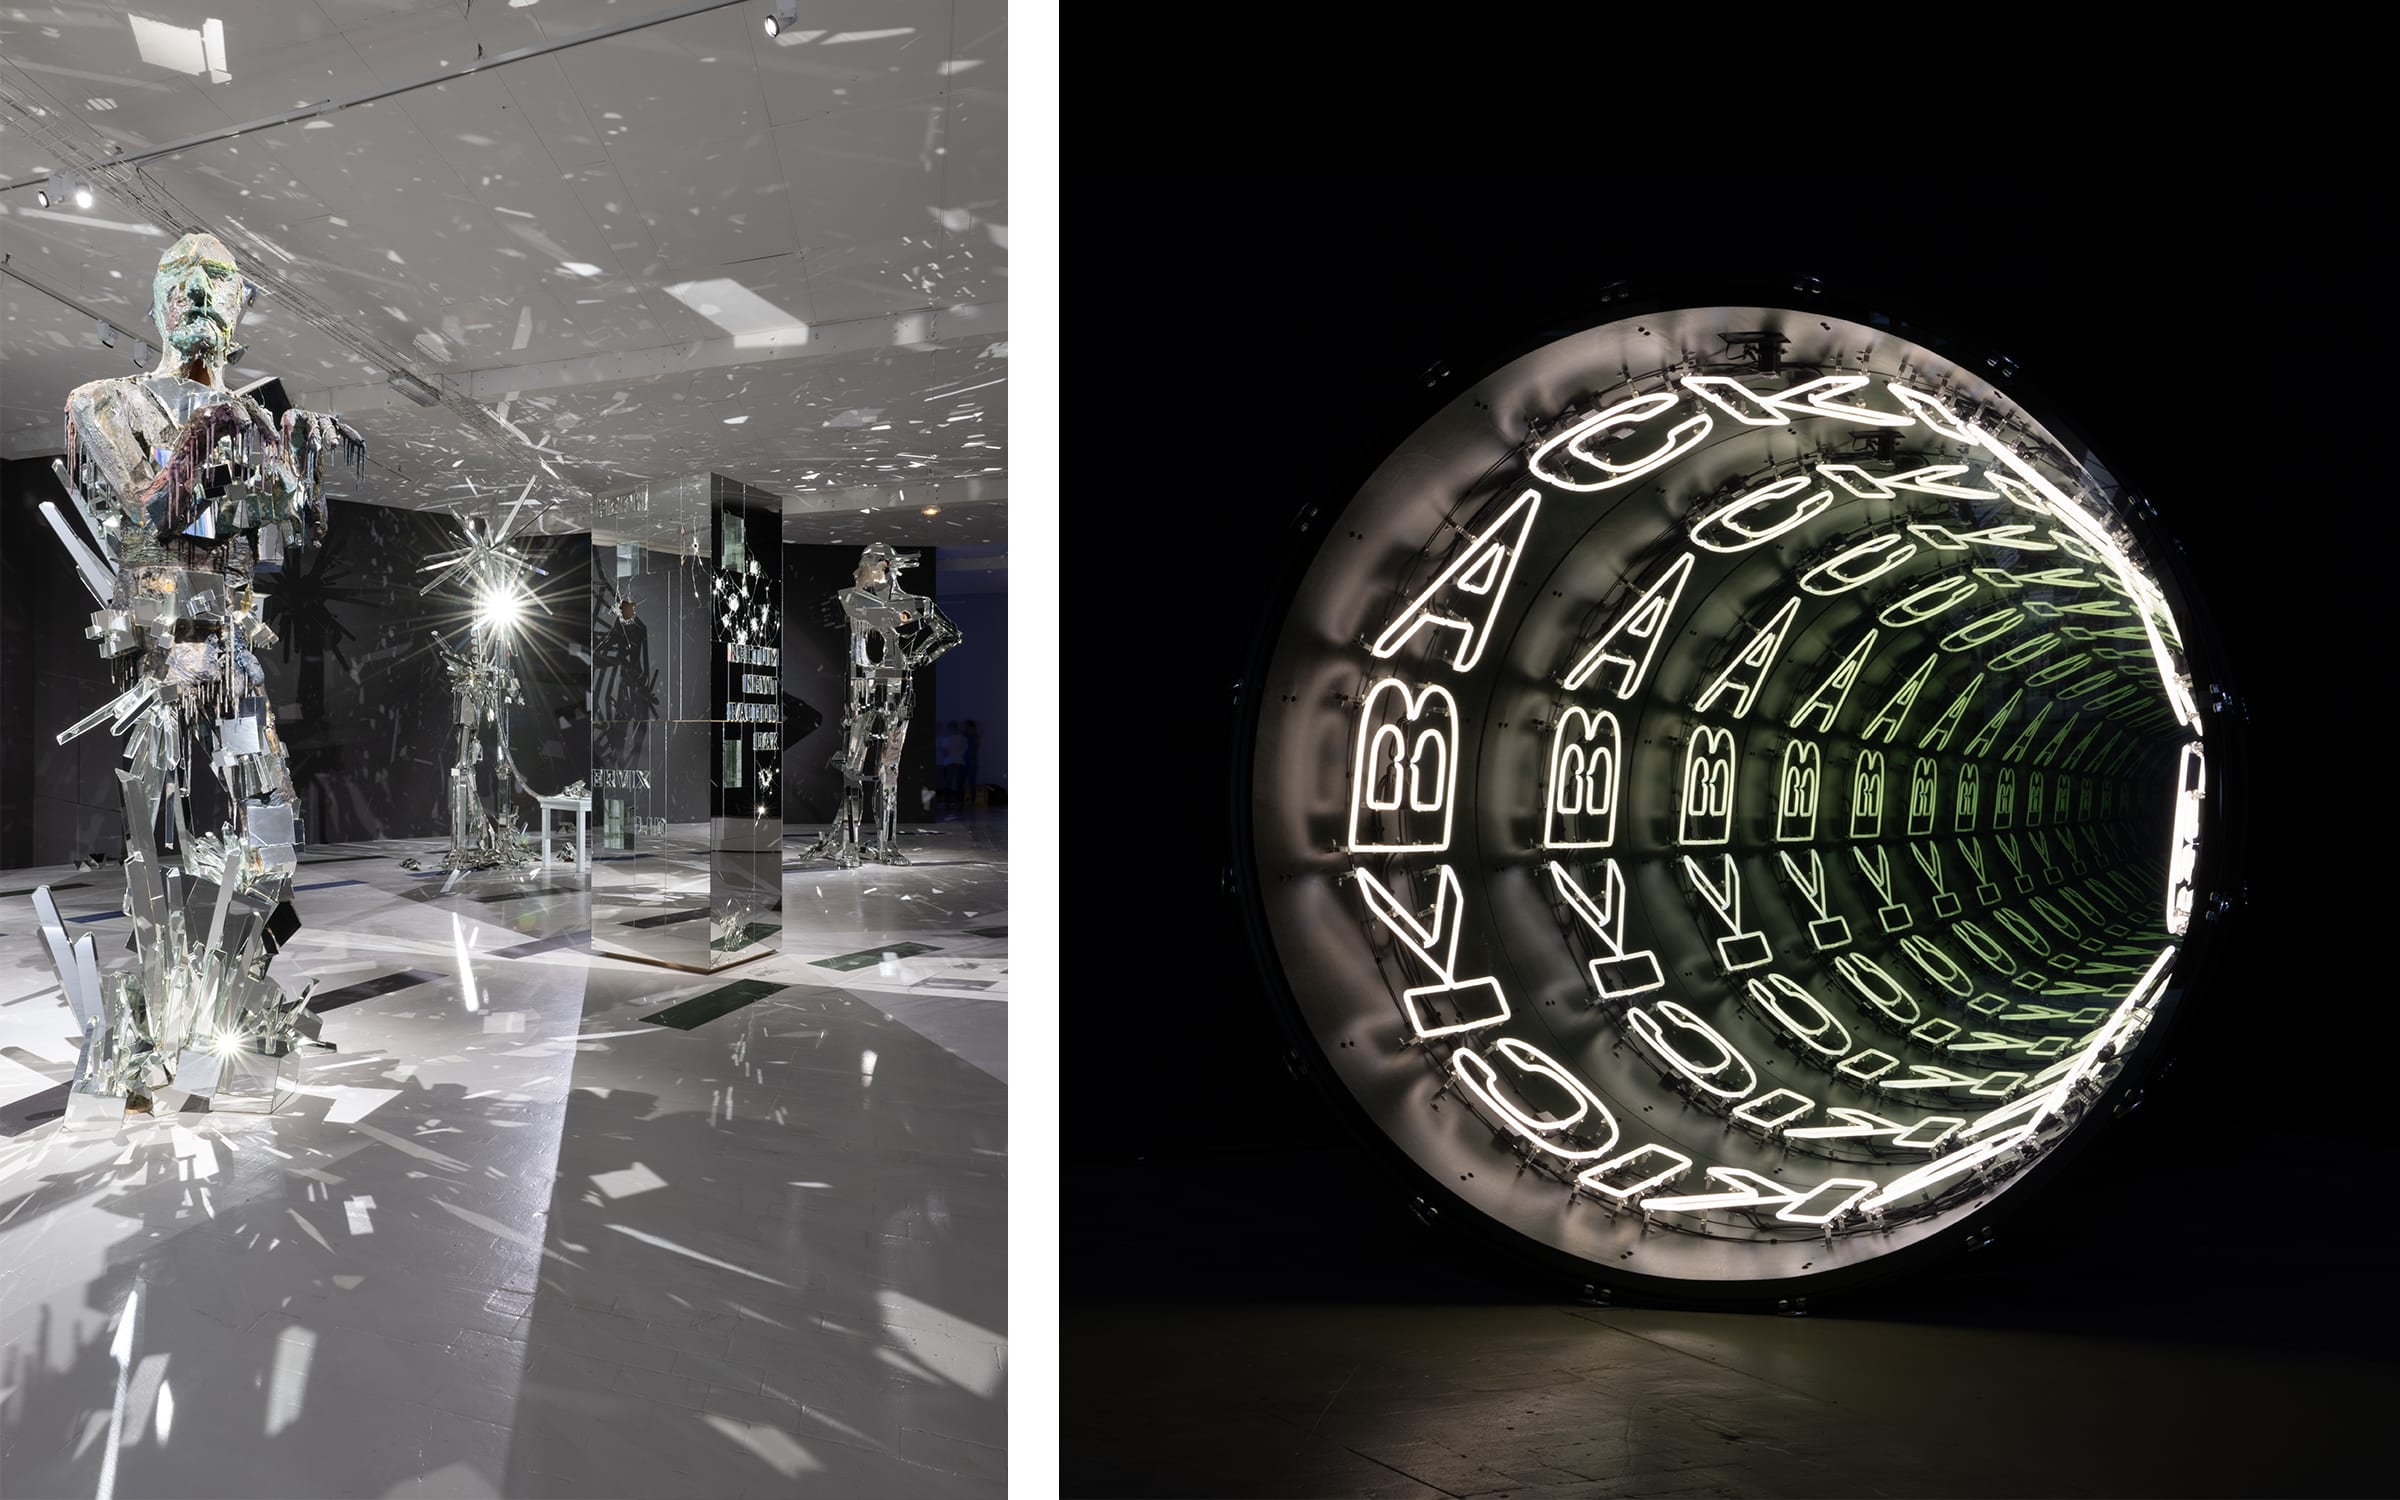 Left: David Altmejd, The Giants, 2007. Photograph by Joost Vanhaerents. Courtesy of the Vanhaerents Art Collection Brussels. Right: Installation view of Ivan Navarro, KICKBACKICKBACKICKBACK, 2016 at Tripostal, Lille, 2023. Photograph by Joost Vanhaerents. Courtesy of the Vanhaerents Art Collection Brussels.     